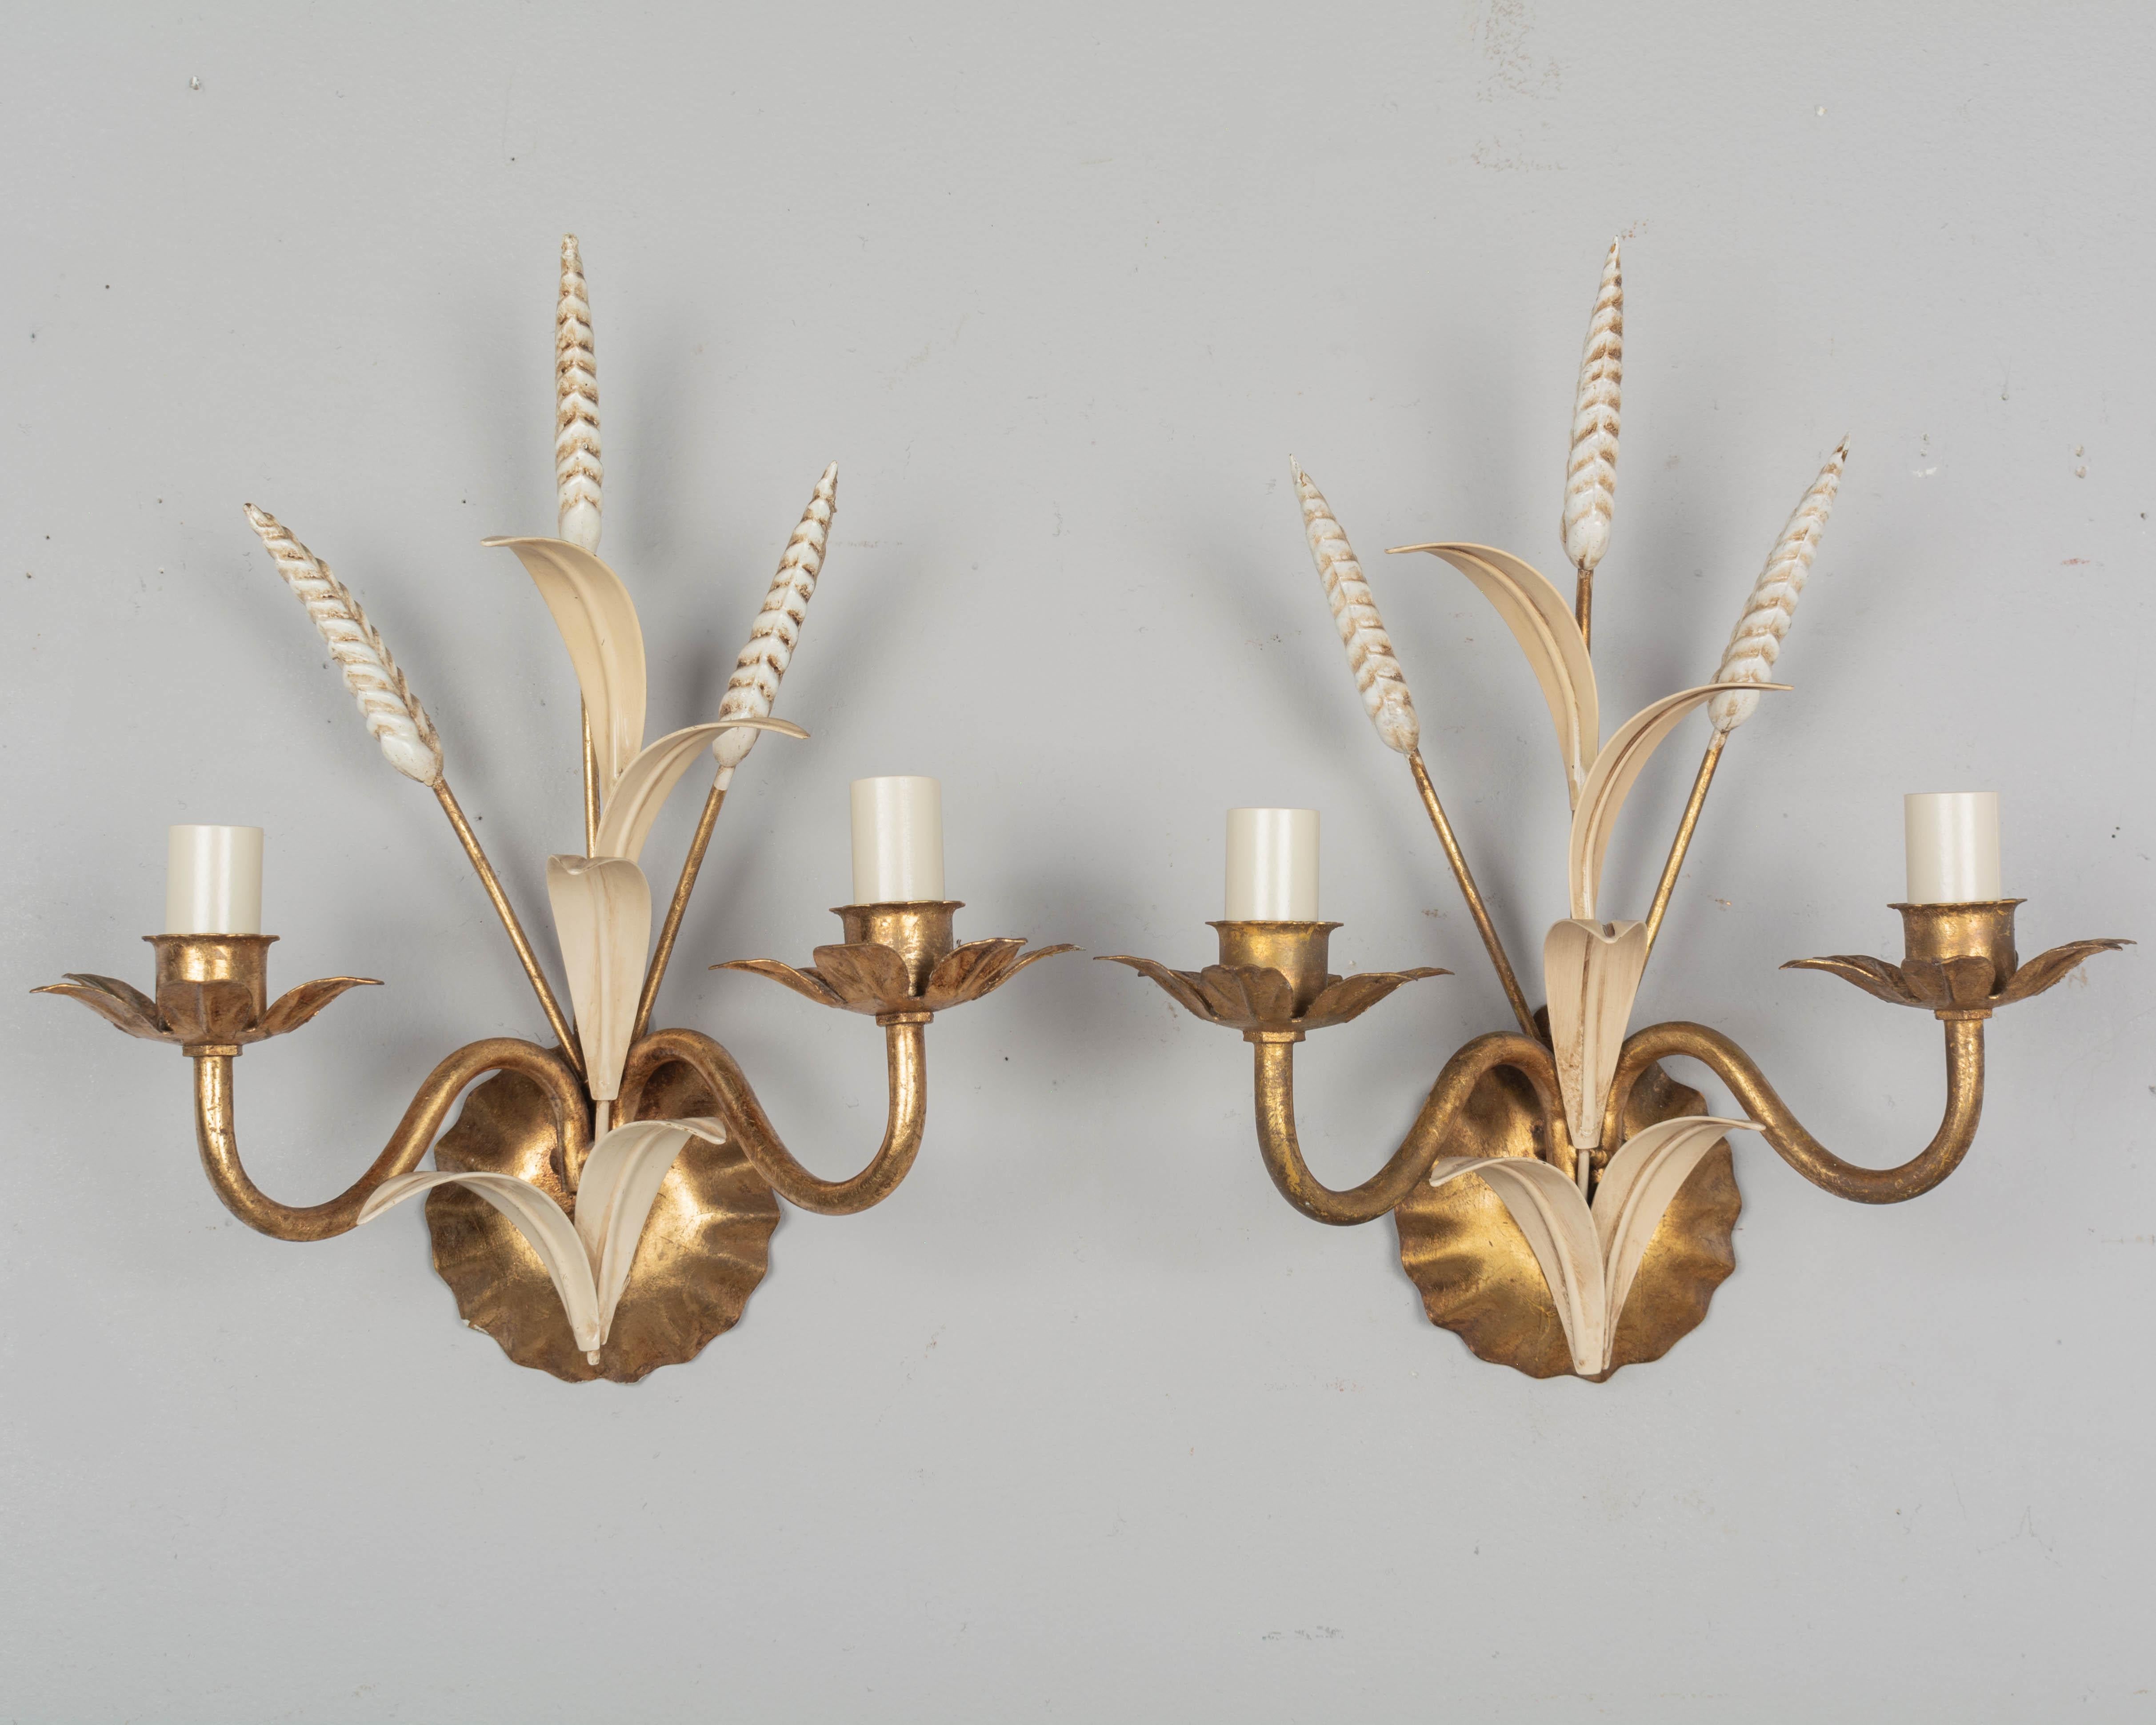 A pair of Hollywood Regency style two-light gilt metal sconces with painted tôle leaves and wheat stems. Designed by Hans Kögl and made in Italy. New sockets and candle covers. Wired and in working order. Circa 1960-1970. 
Dimensions: 10.5